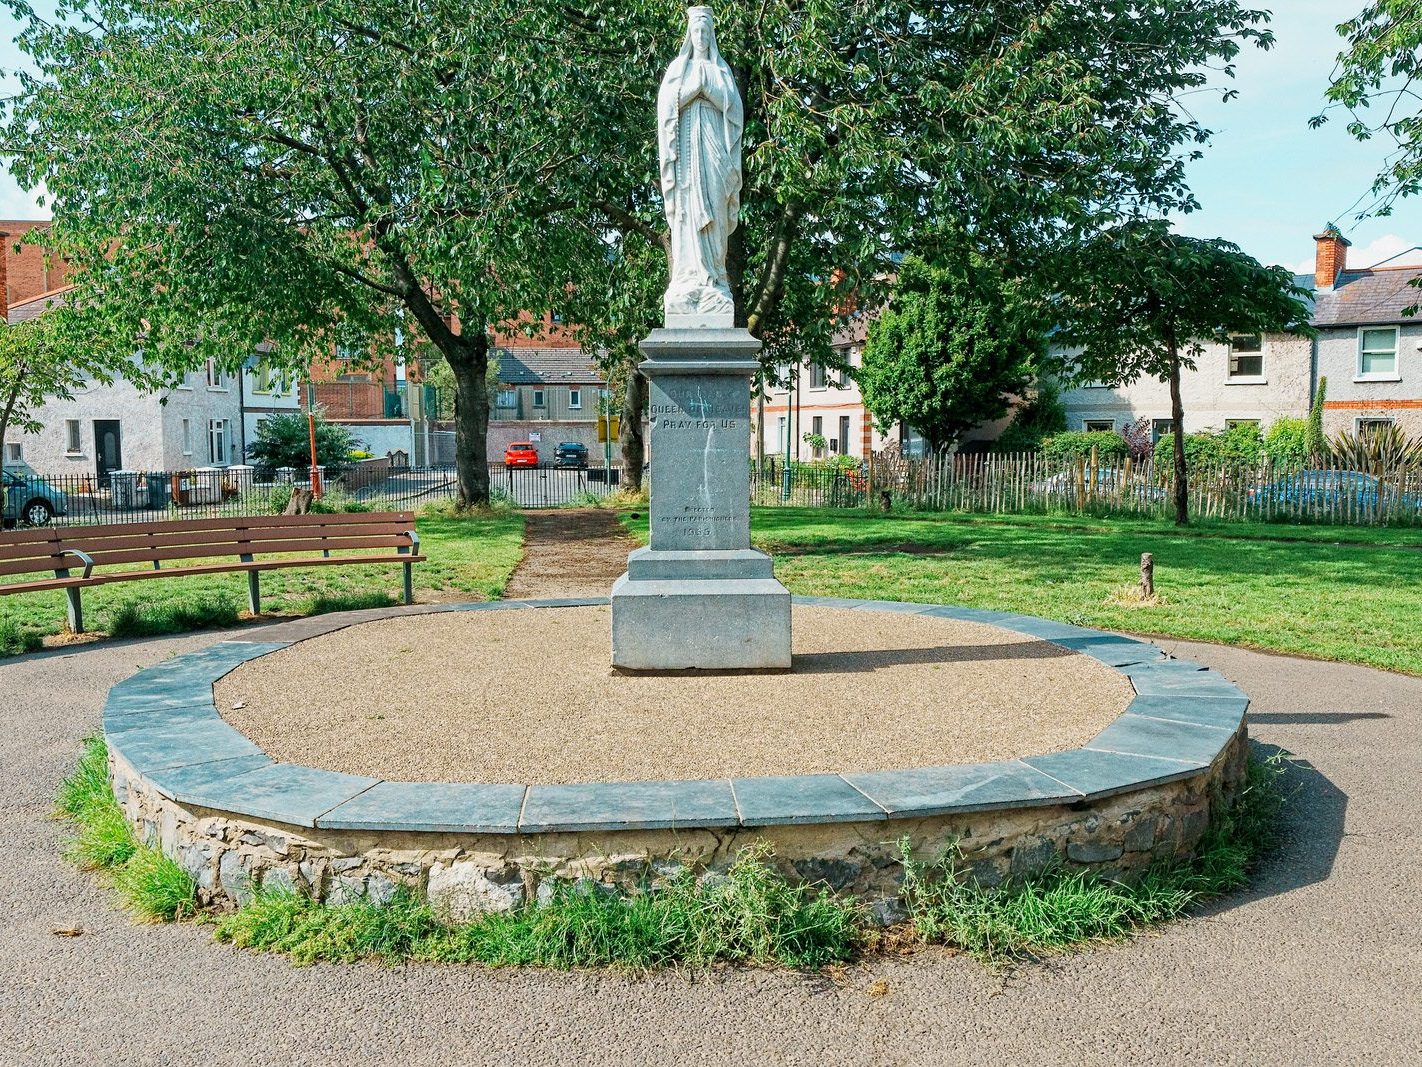 MARIAN STATUE ERECTED IN 1955 RATHER THAN 1955 [OSCAR SQUARE PARK] 005